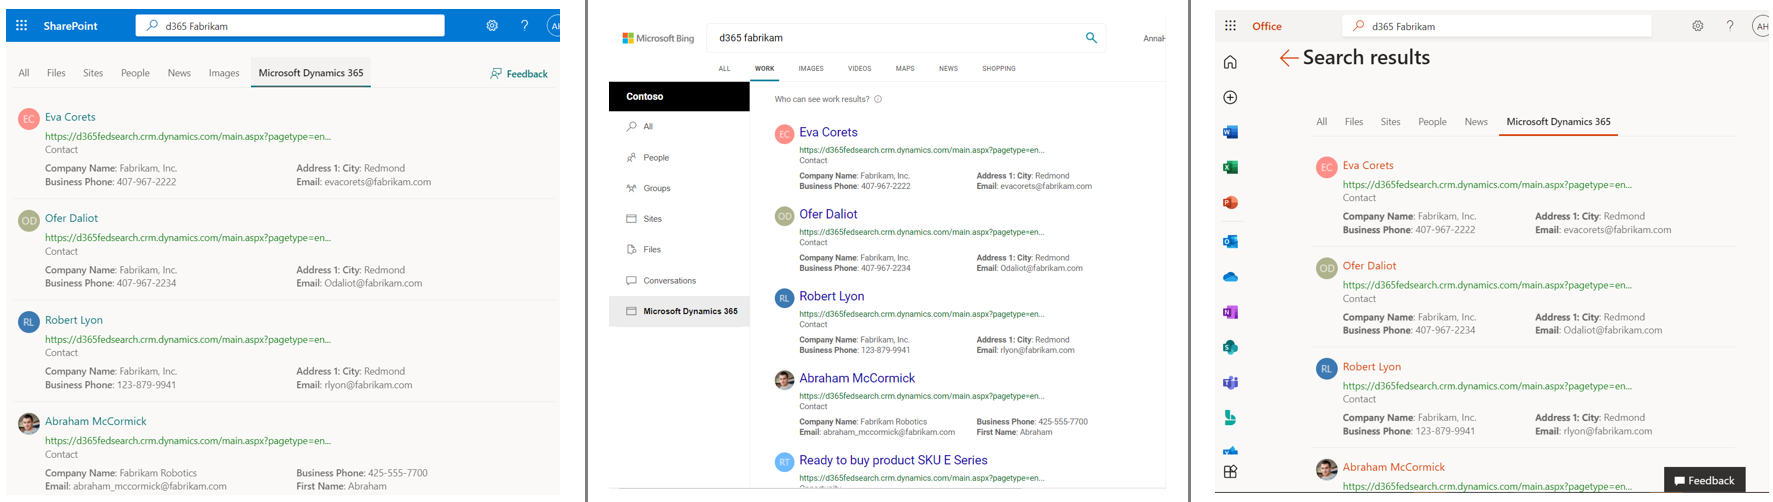 Screenshot of Dynamics 365 vertical and results on SharePoint, Bing, and Office.